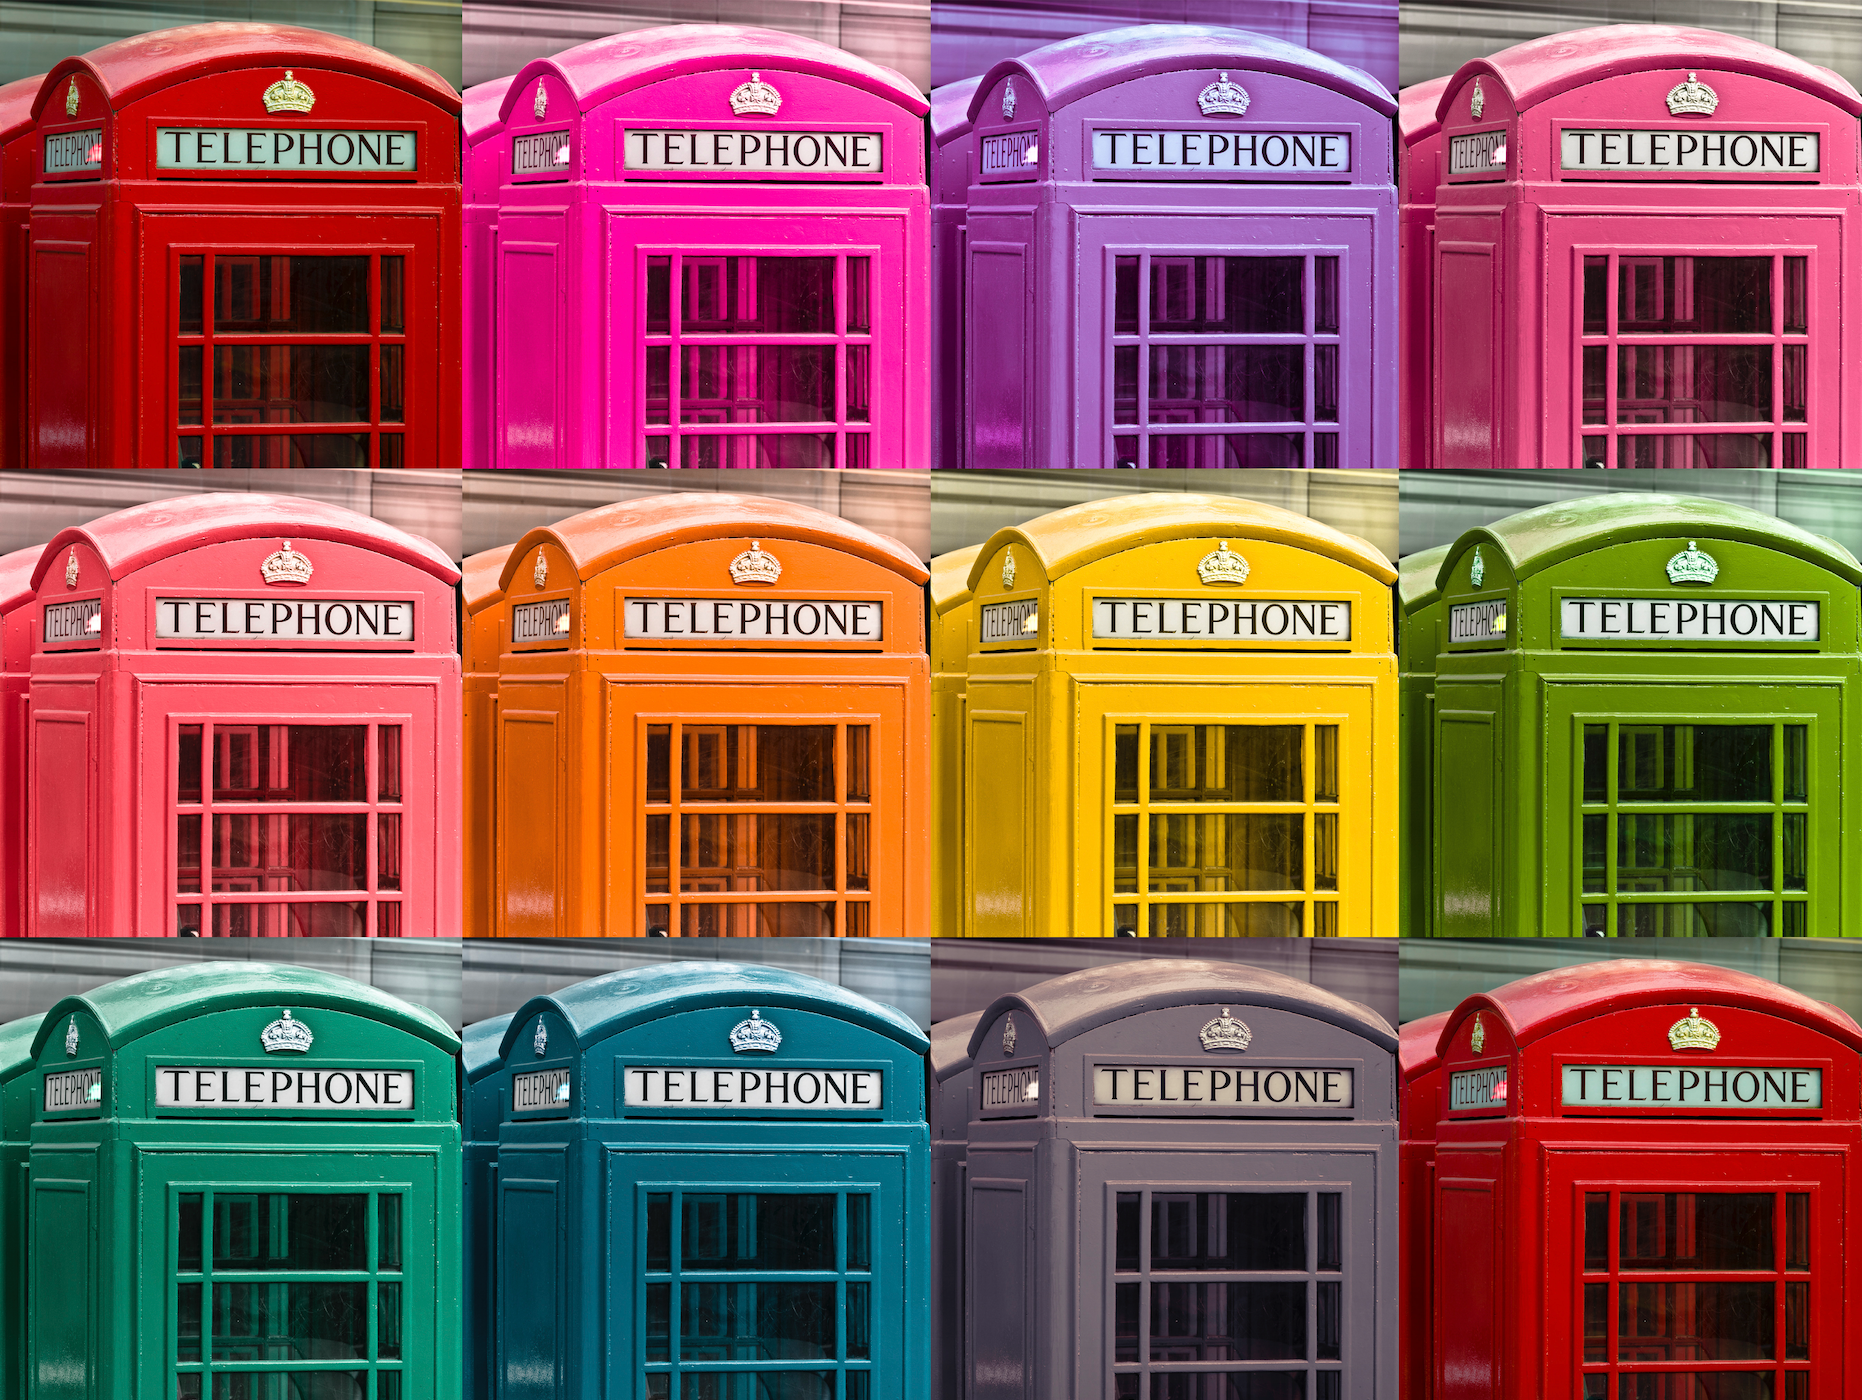 The Telephones of London